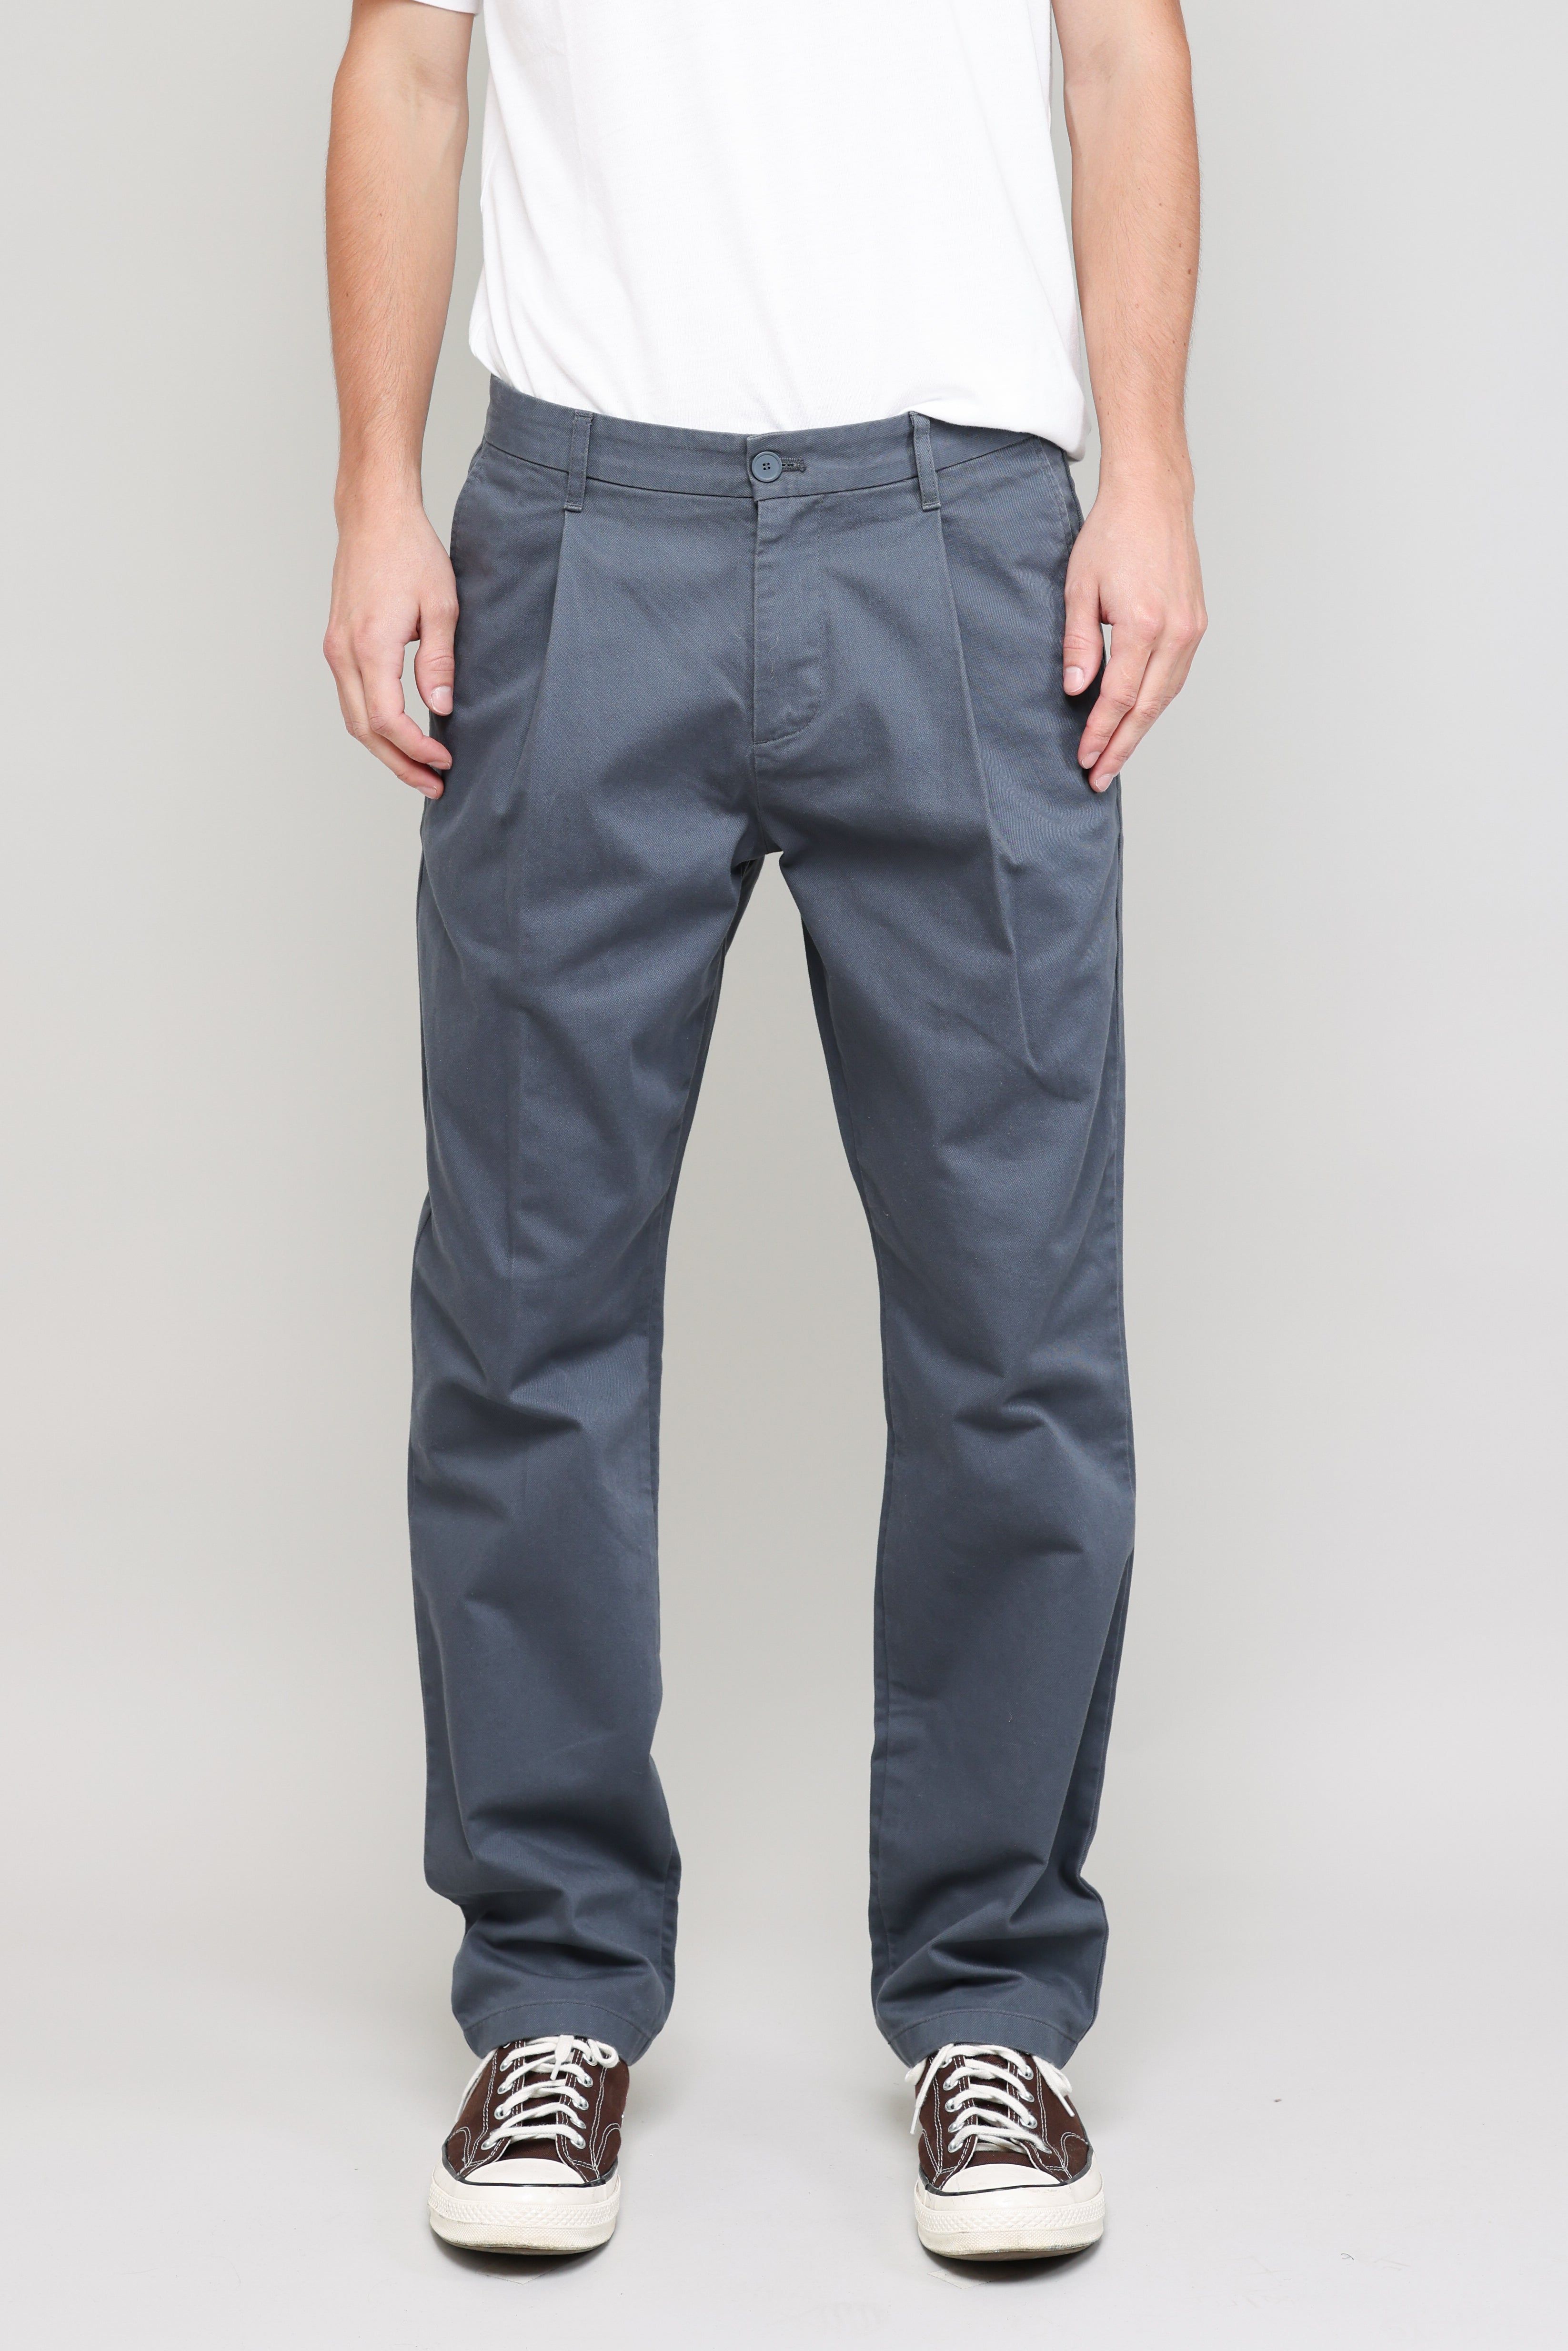 Pleated Chino Vintage French Drill in Blue Grey 01